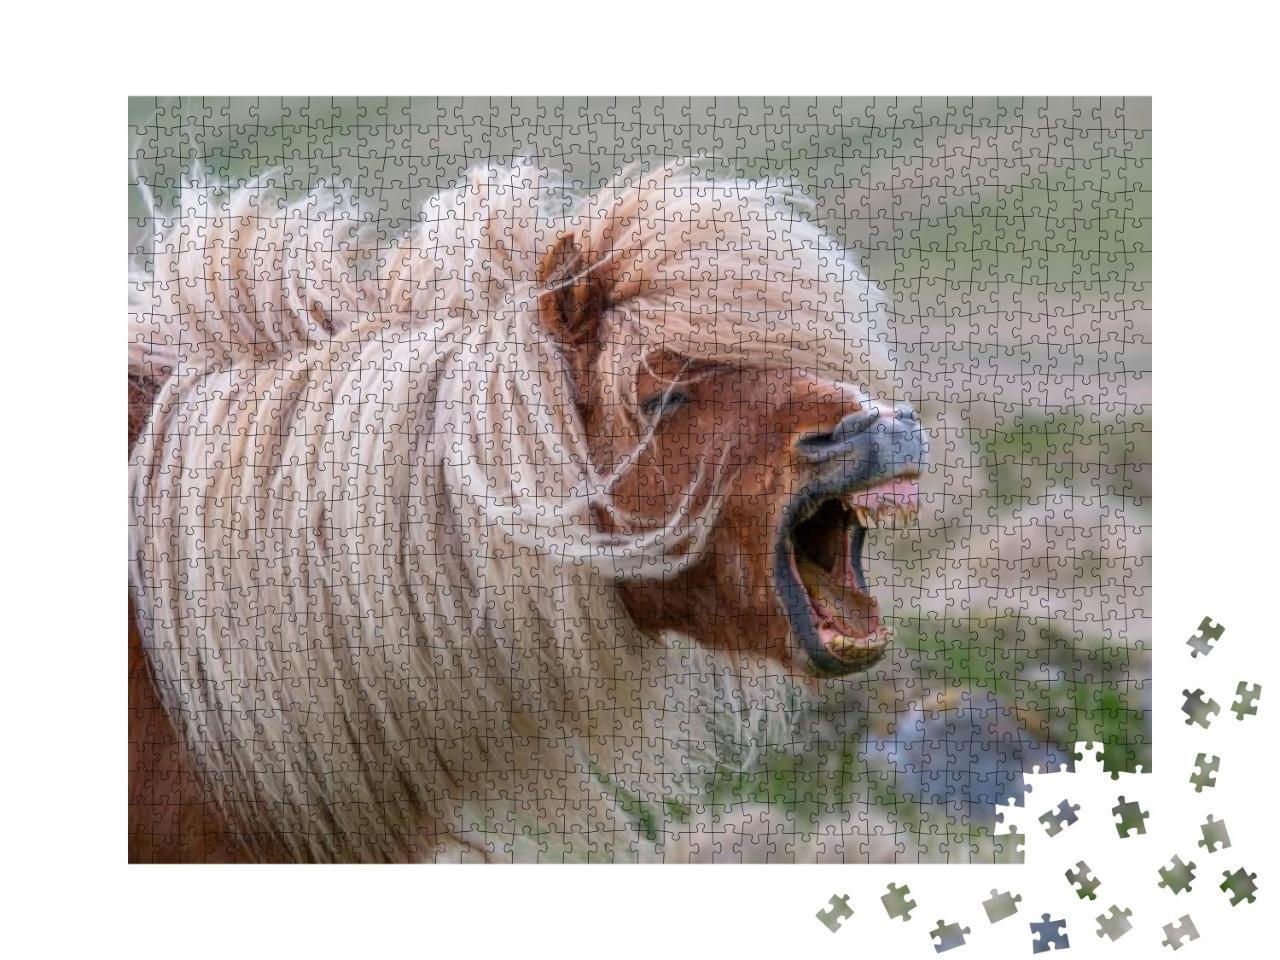 A Lone Shetland Pony Brays, Showing His Teeth on a Scotti... Jigsaw Puzzle with 1000 pieces